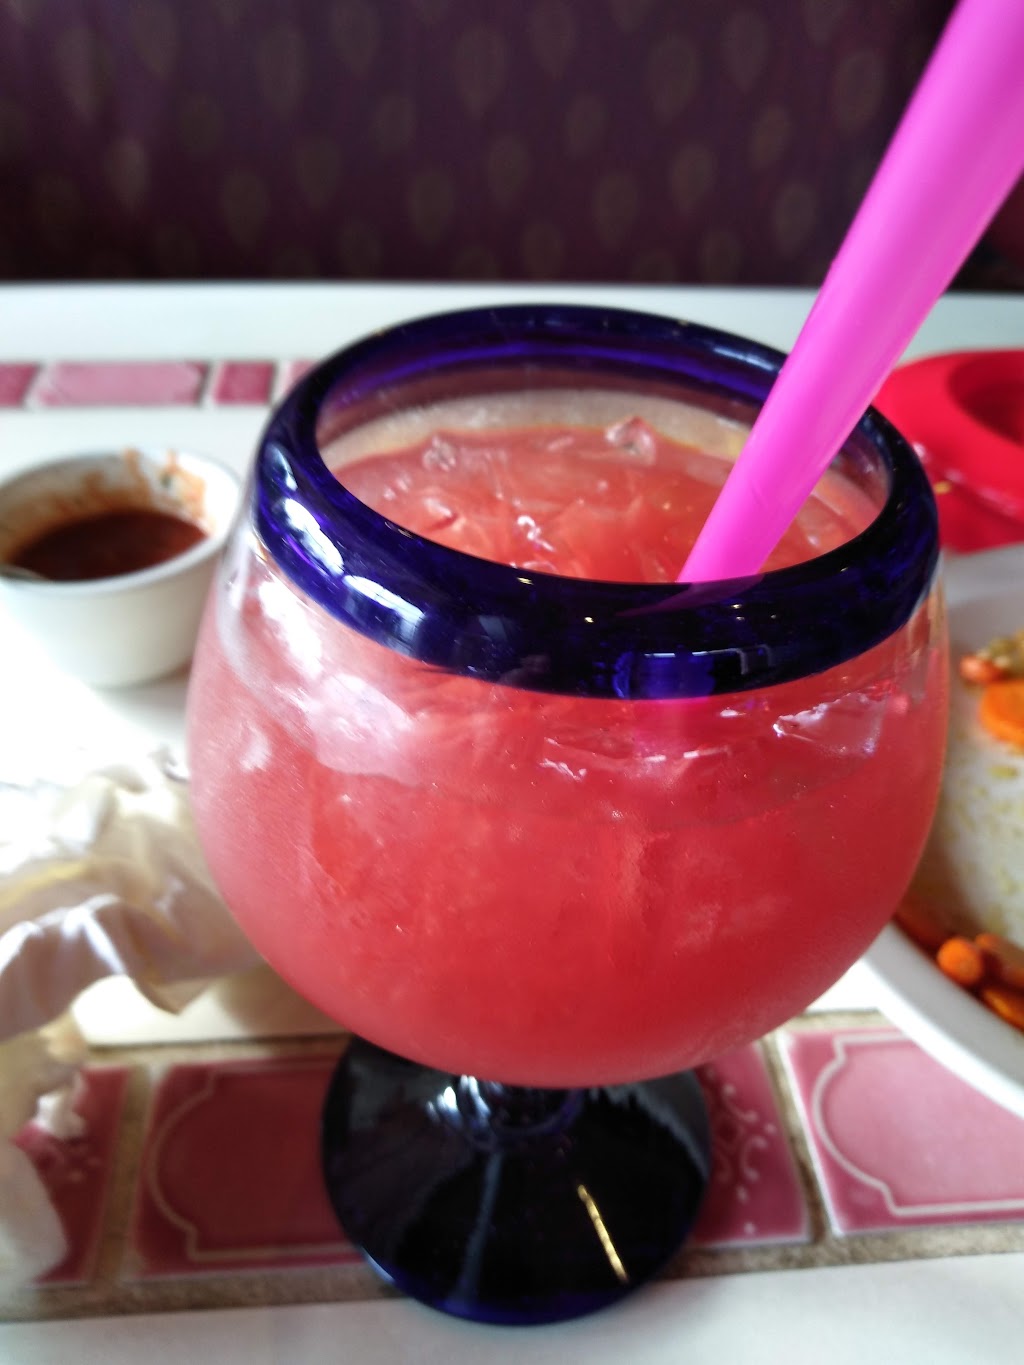 Viva Mexico Restaurant | 26015 Pacific Hwy S, Des Moines, WA 98198 | Phone: (253) 839-1903